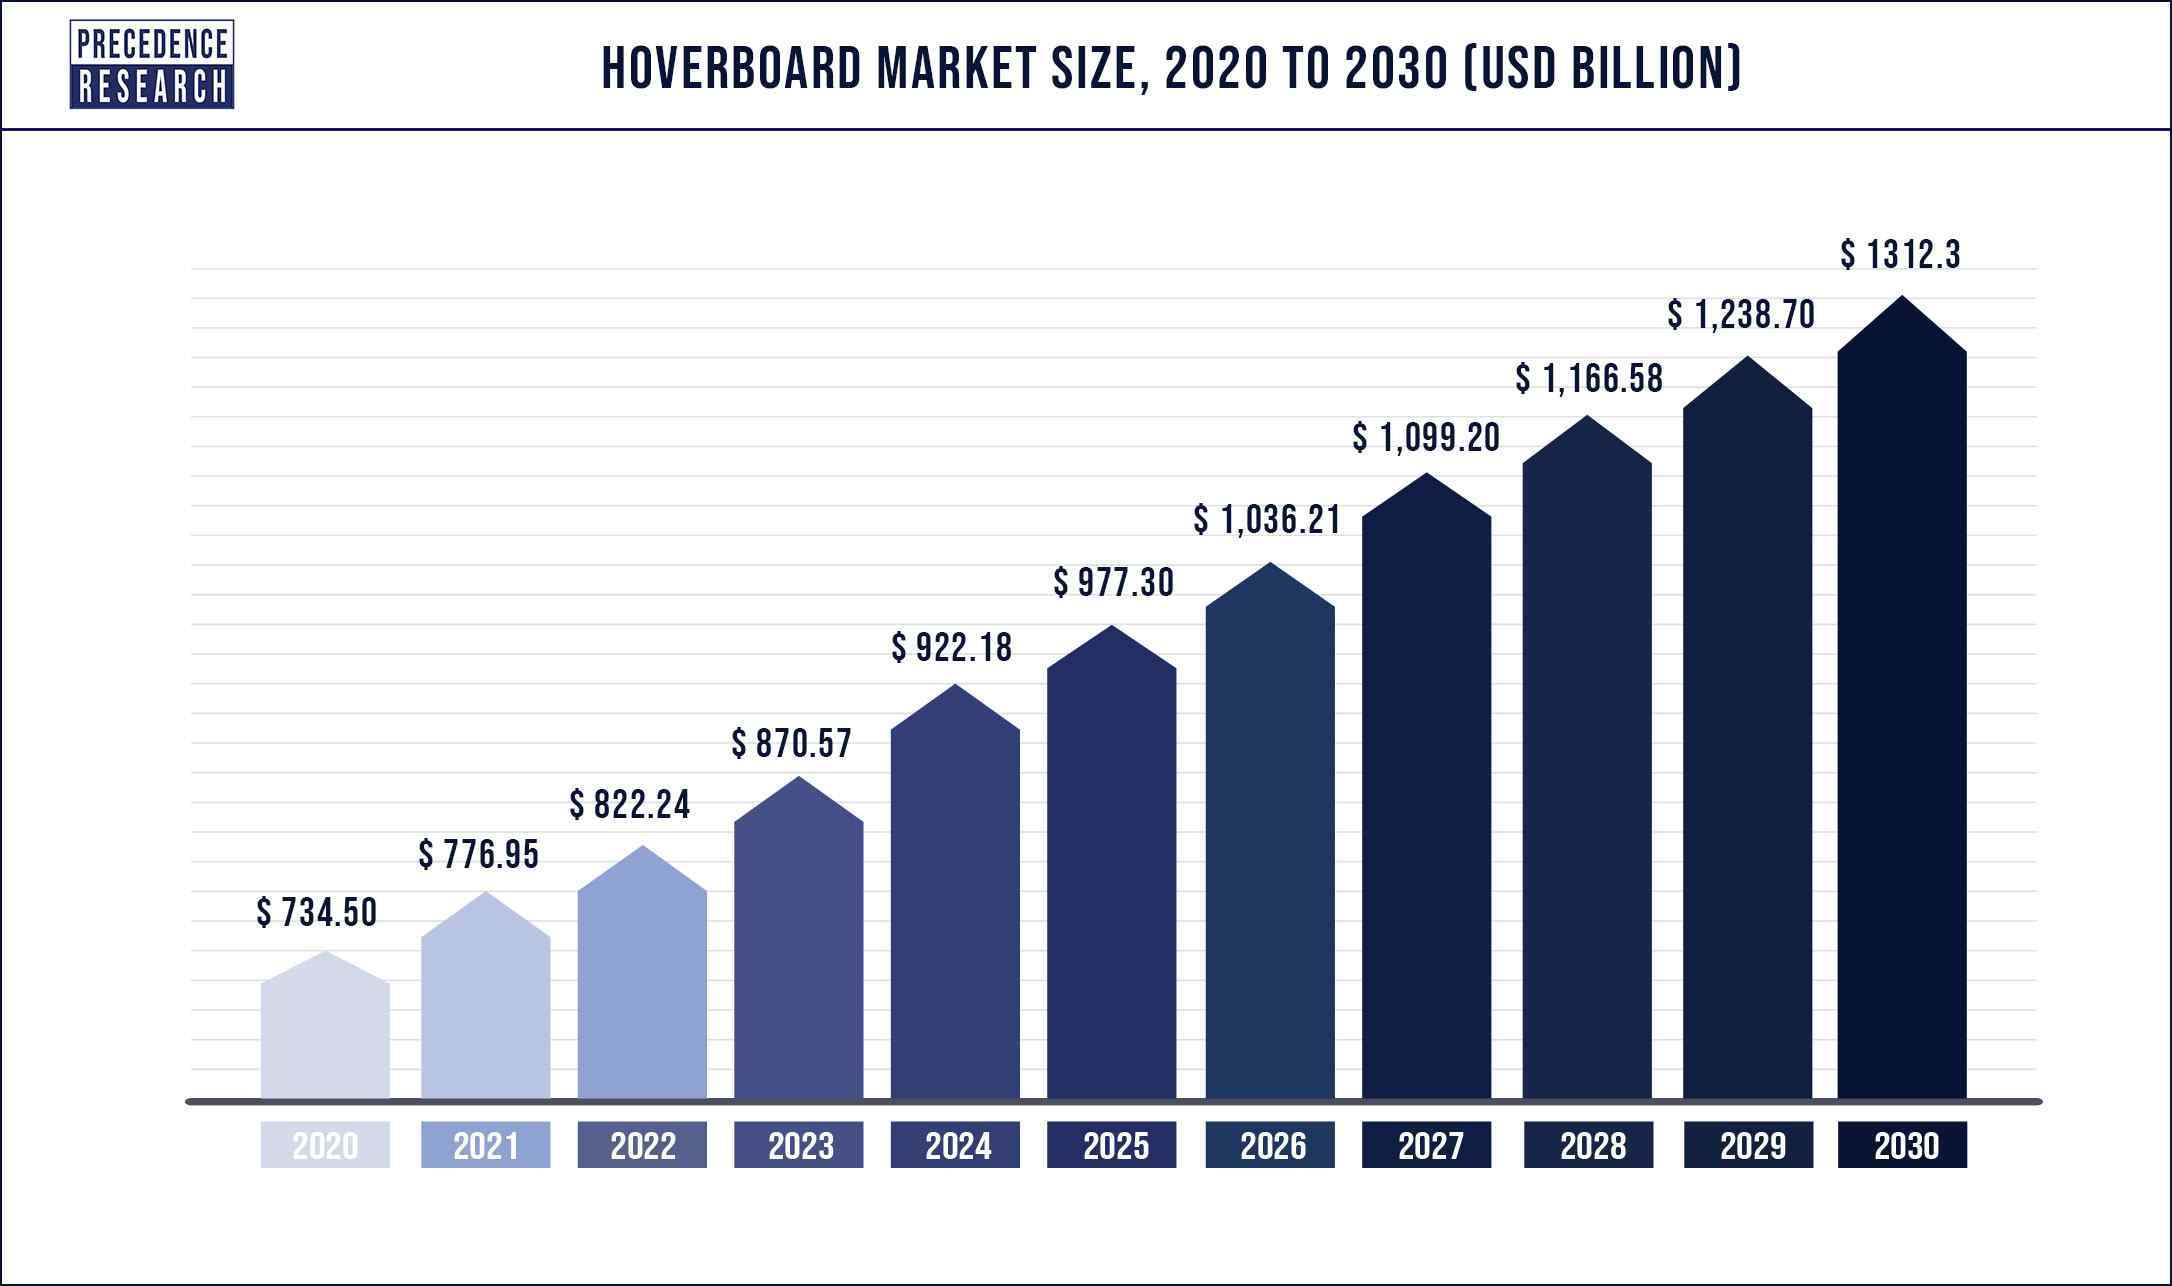 Hoverboard Market Size 2020 to 2030